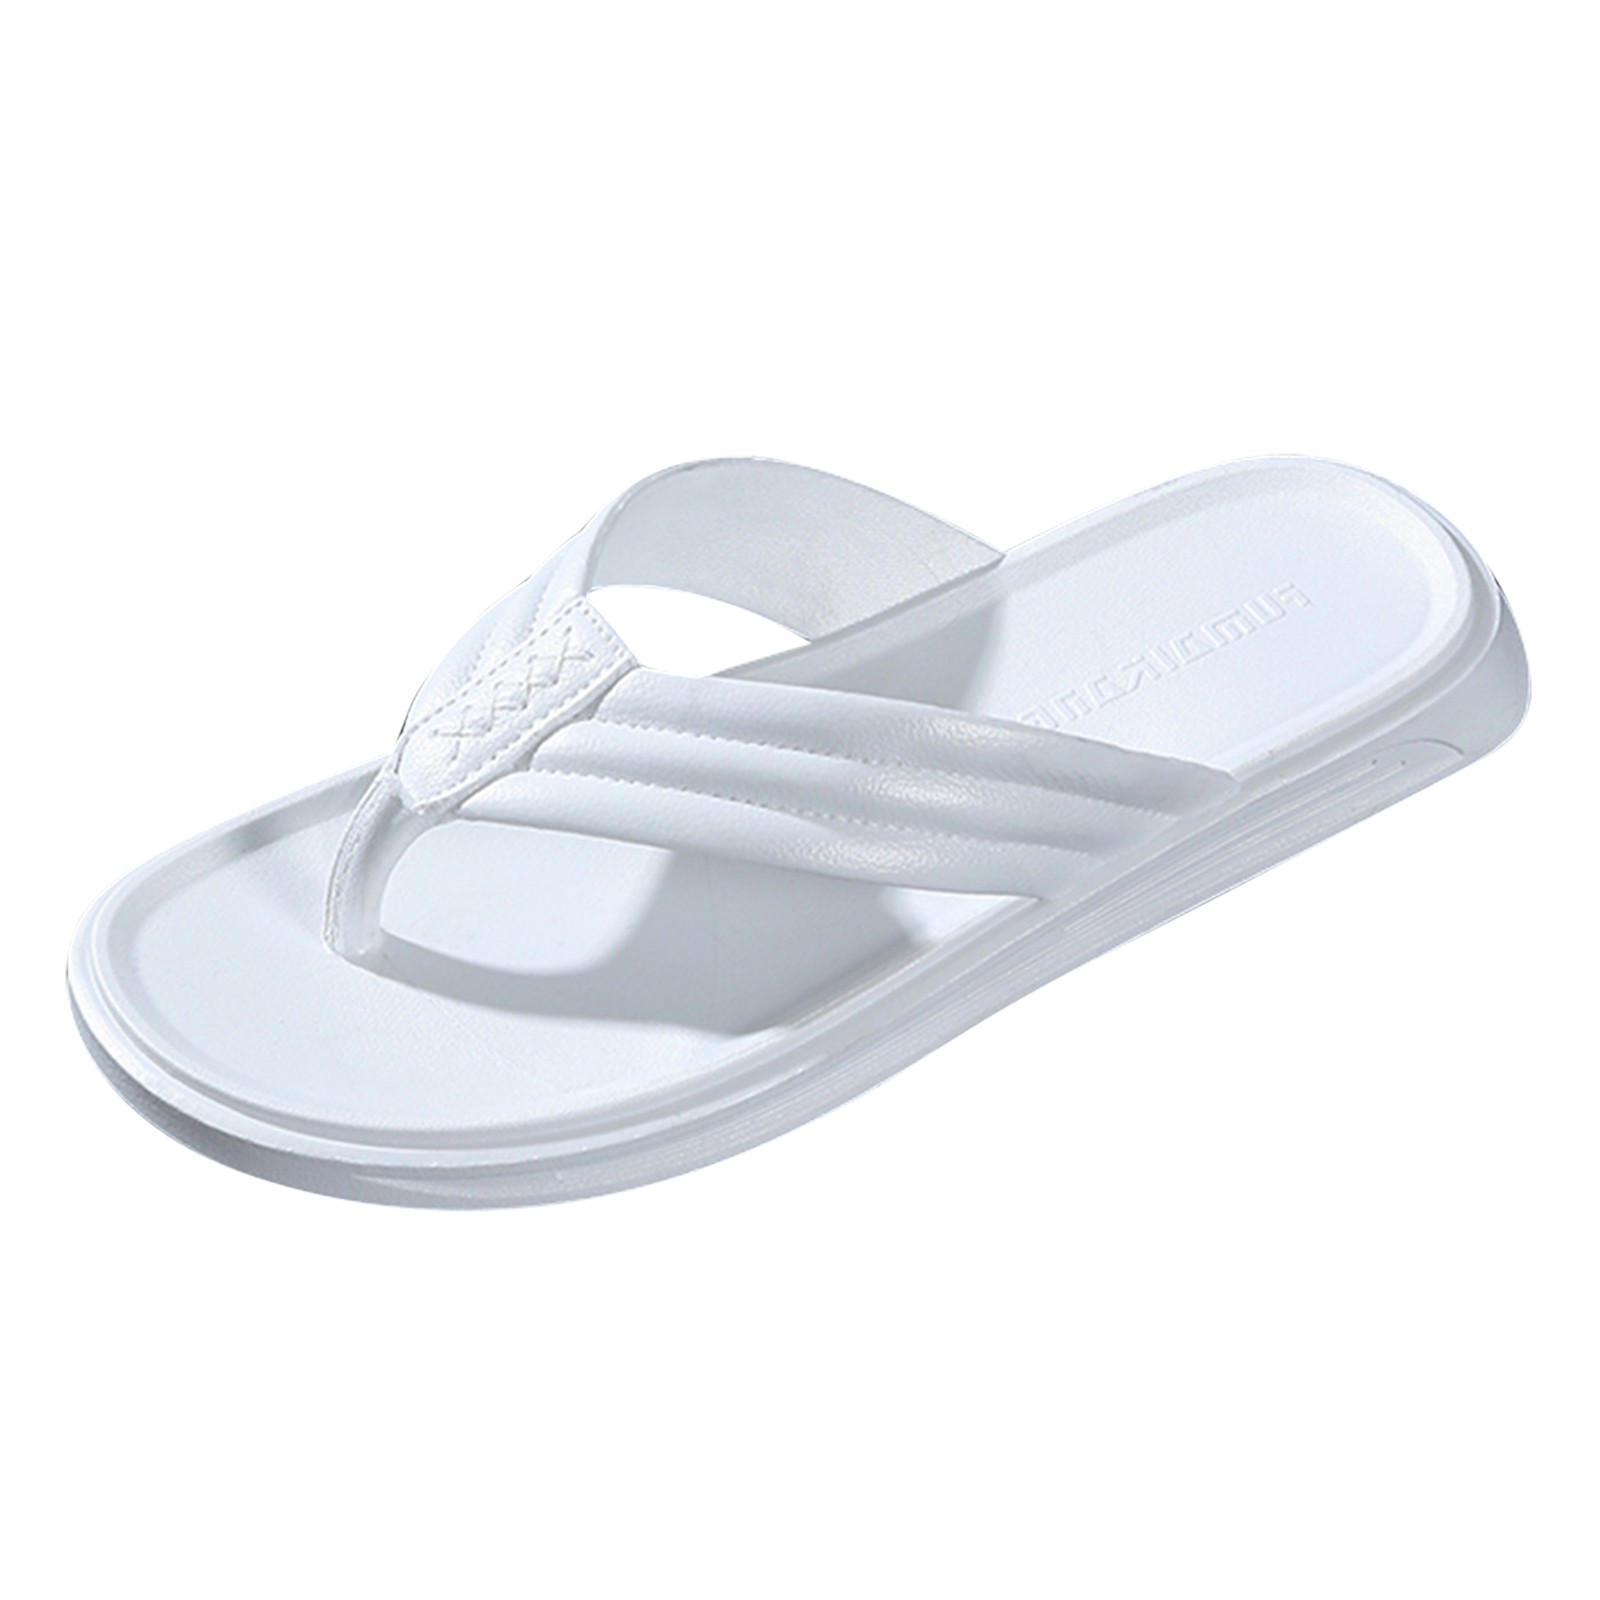 Discover more than 130 foam rubber sandals best